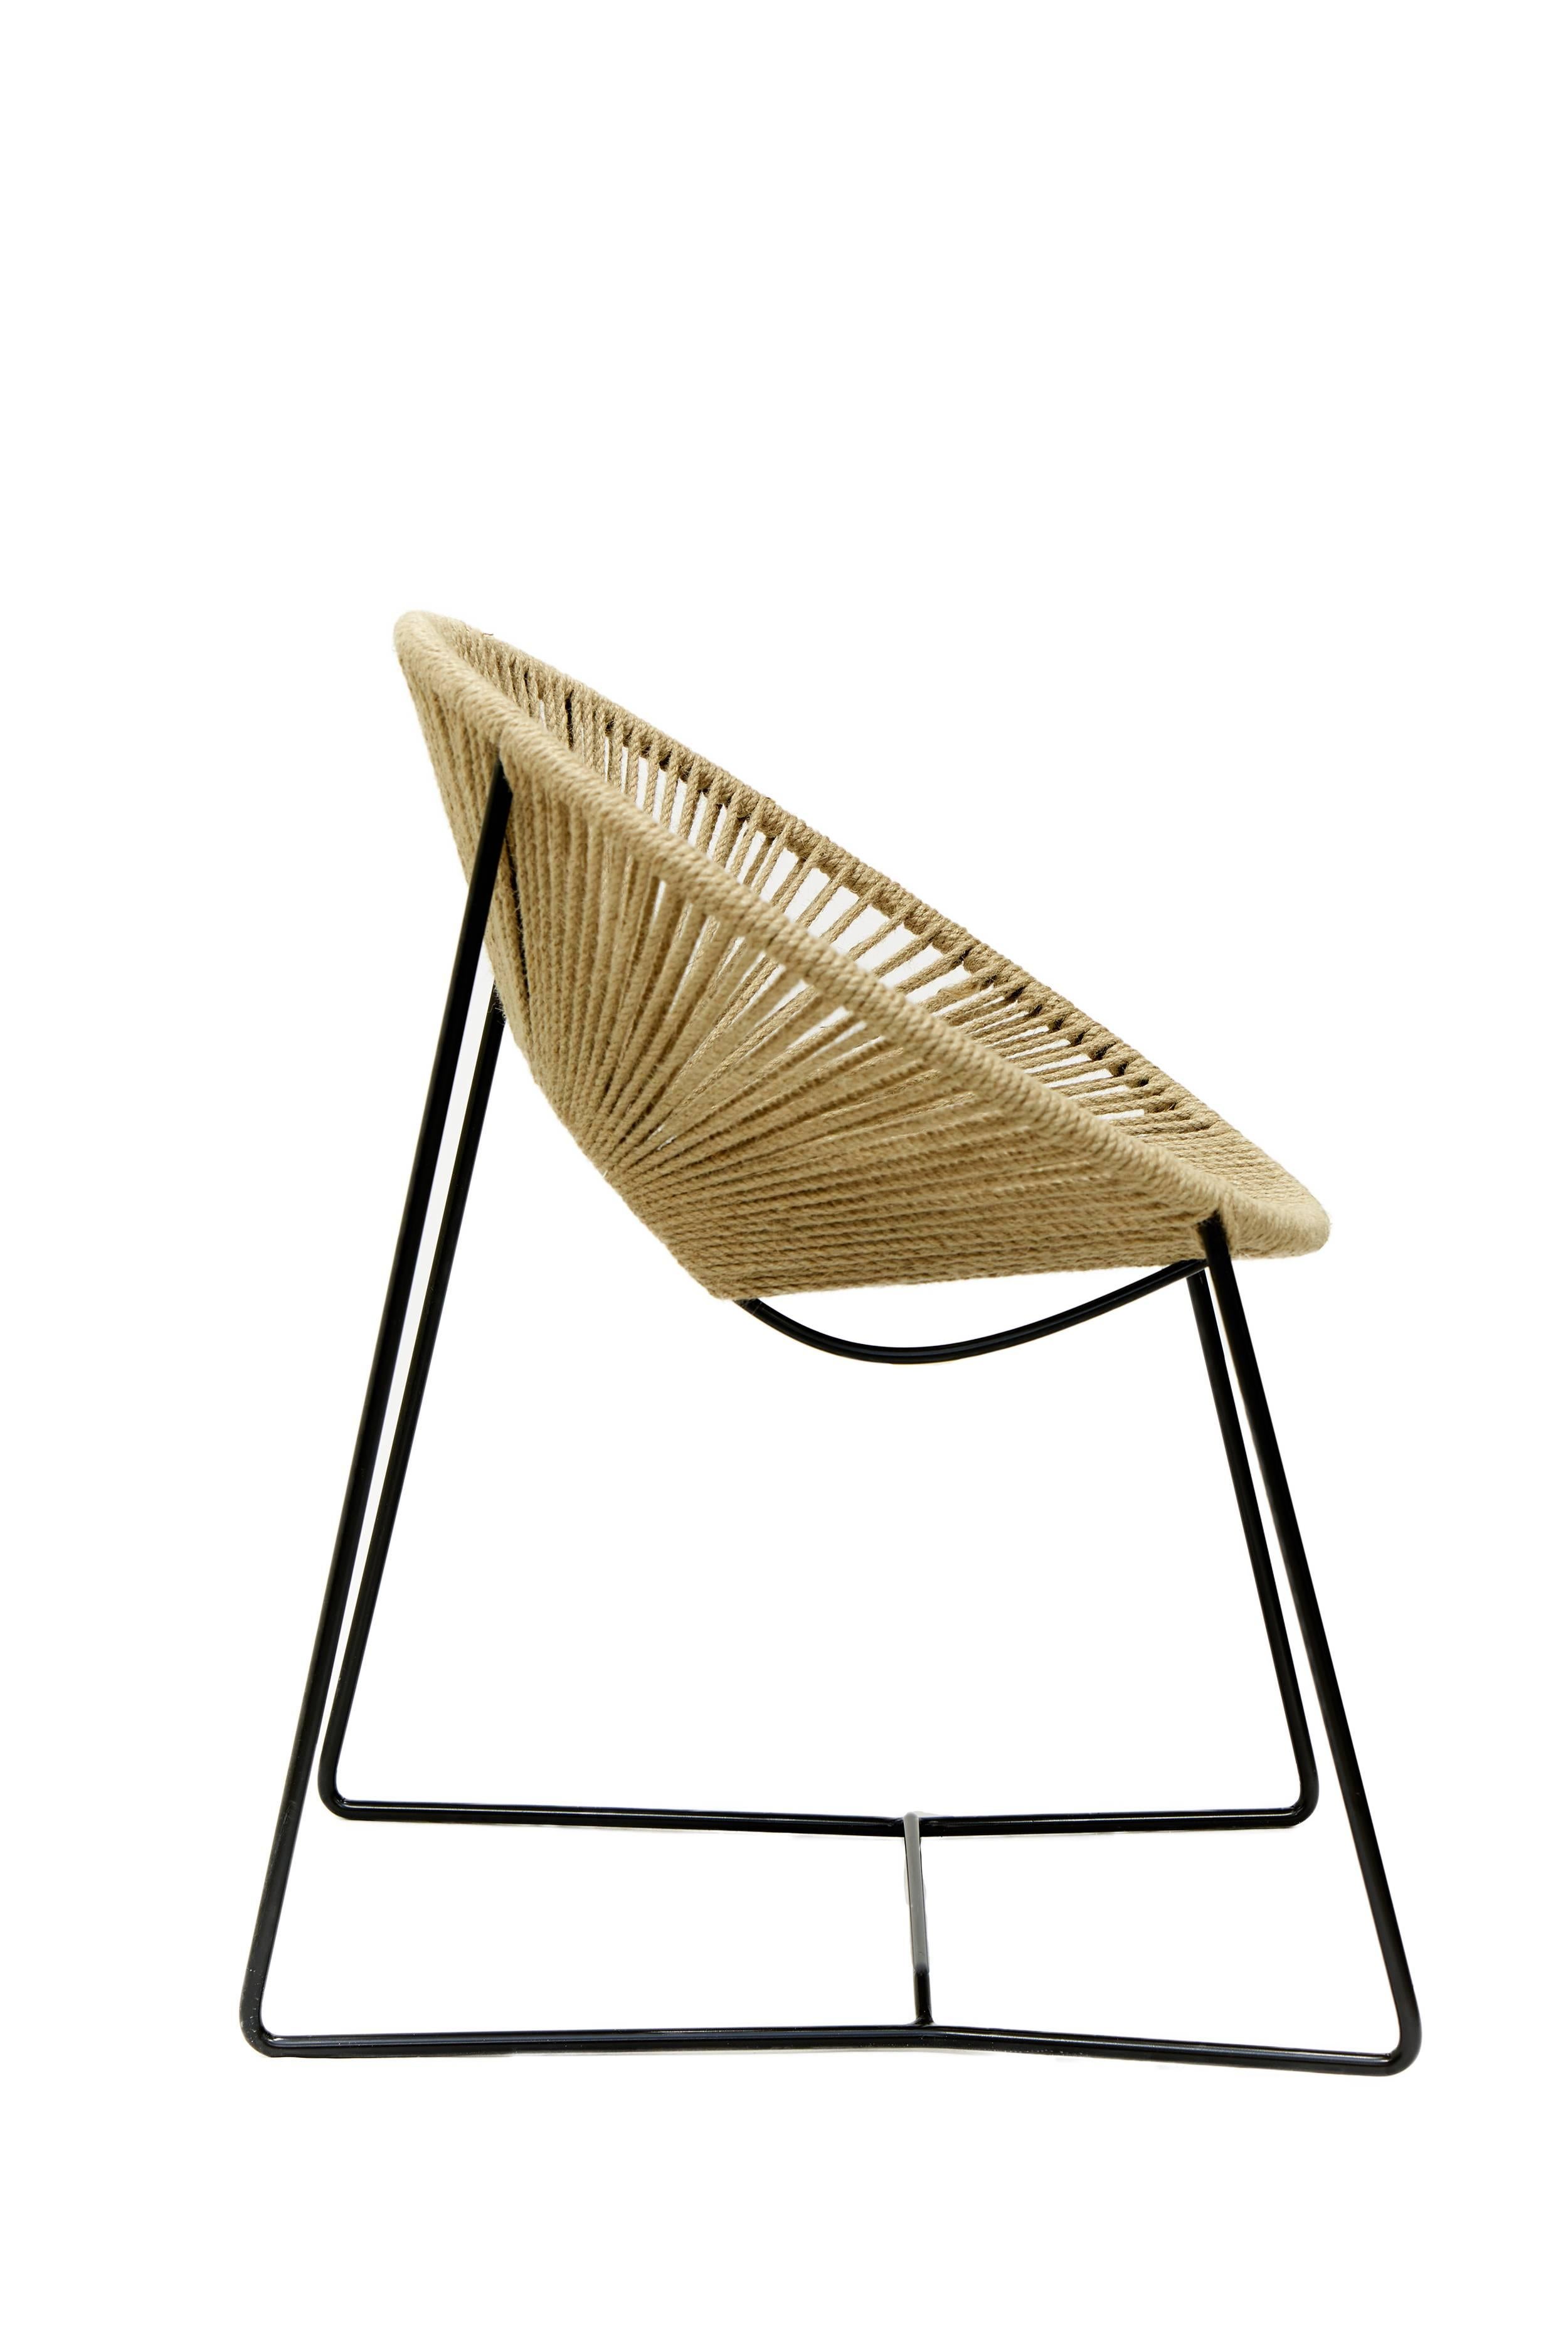 This handwoven tropical Cali dining chair is a unique creation by Leon Leon Design from Mexico City, a modern version of the famous Acapulco chair. Its weaving material is made of organic vegetal fiber handcrafted in Yucatan region